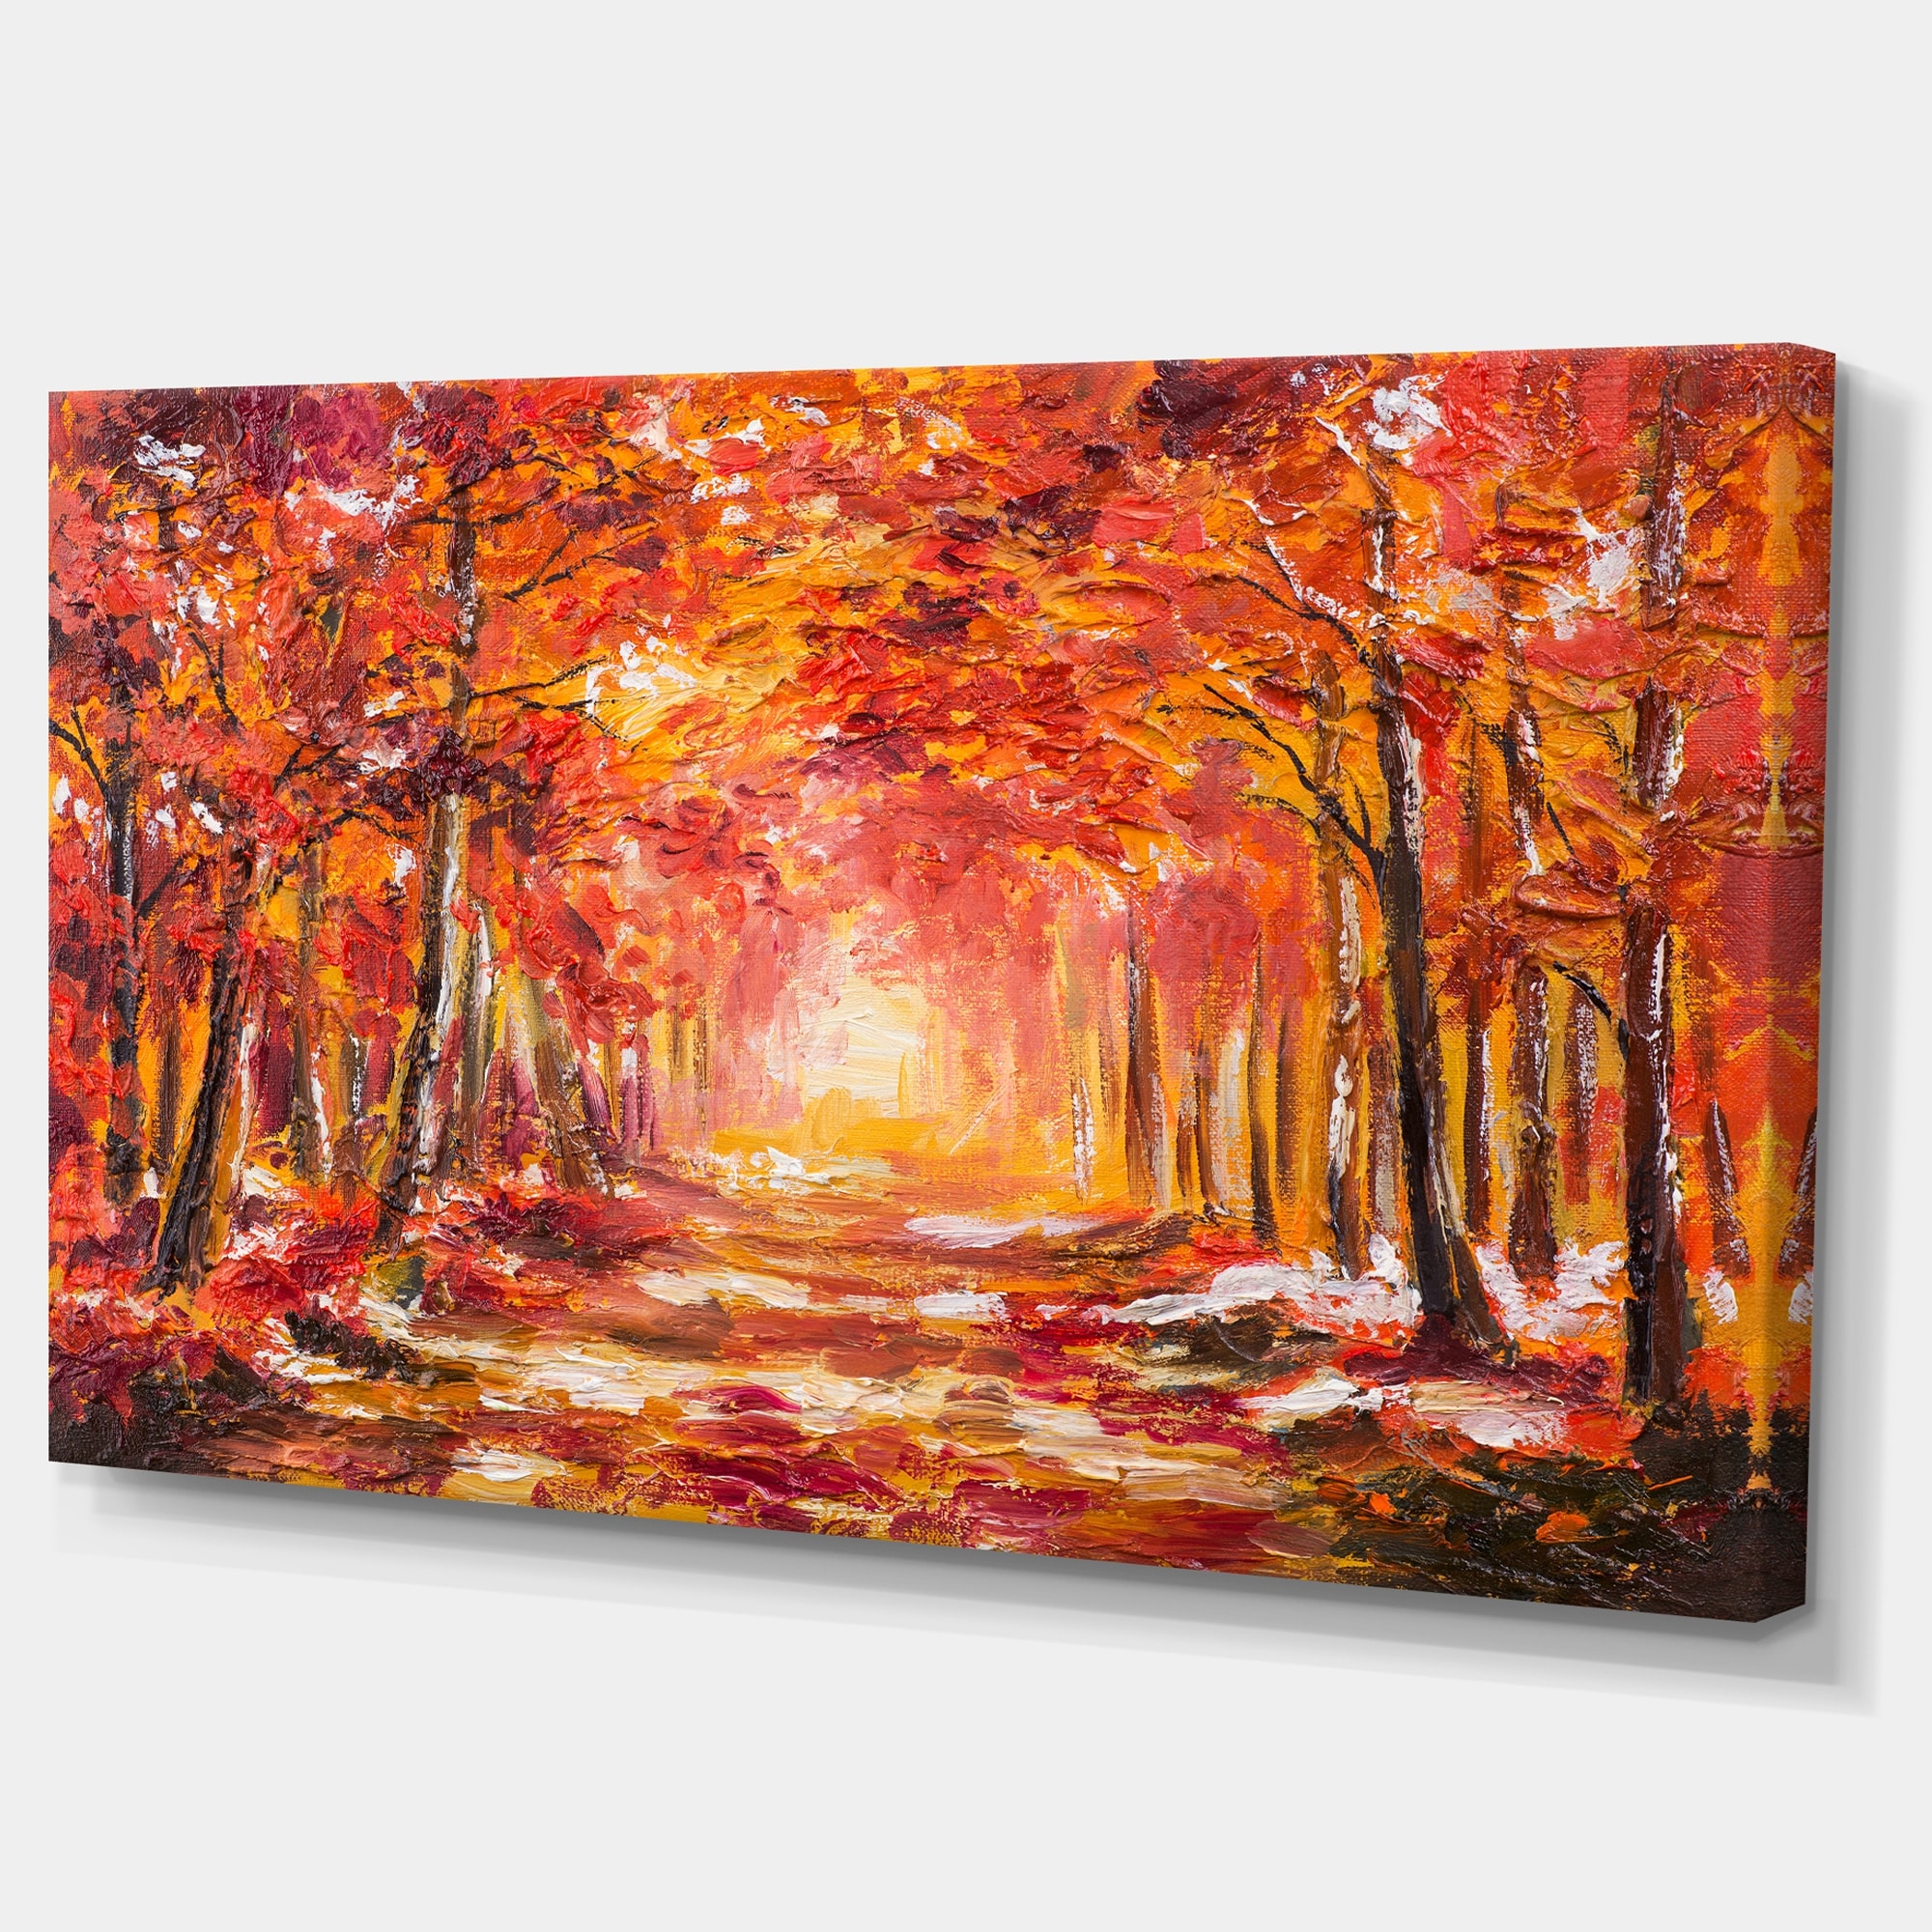 24 x 36 PhotoCanon Art Fall Trees Gallery Wrapped Canvas Landscape Wall Art Red